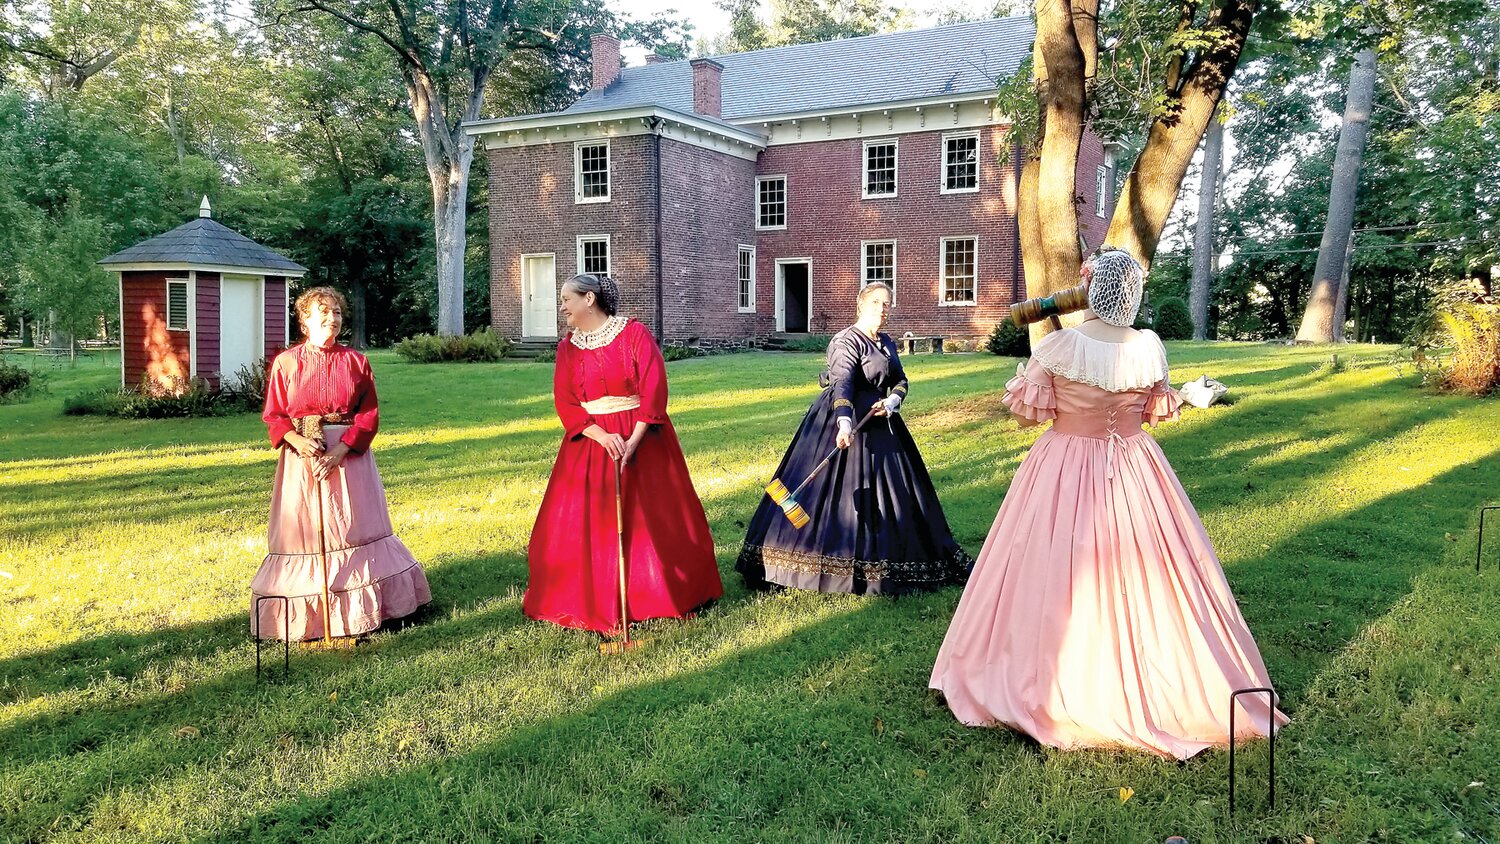 Step back in time with the Tinicum Players’ 1860s "Decades Club" Sept. 28.